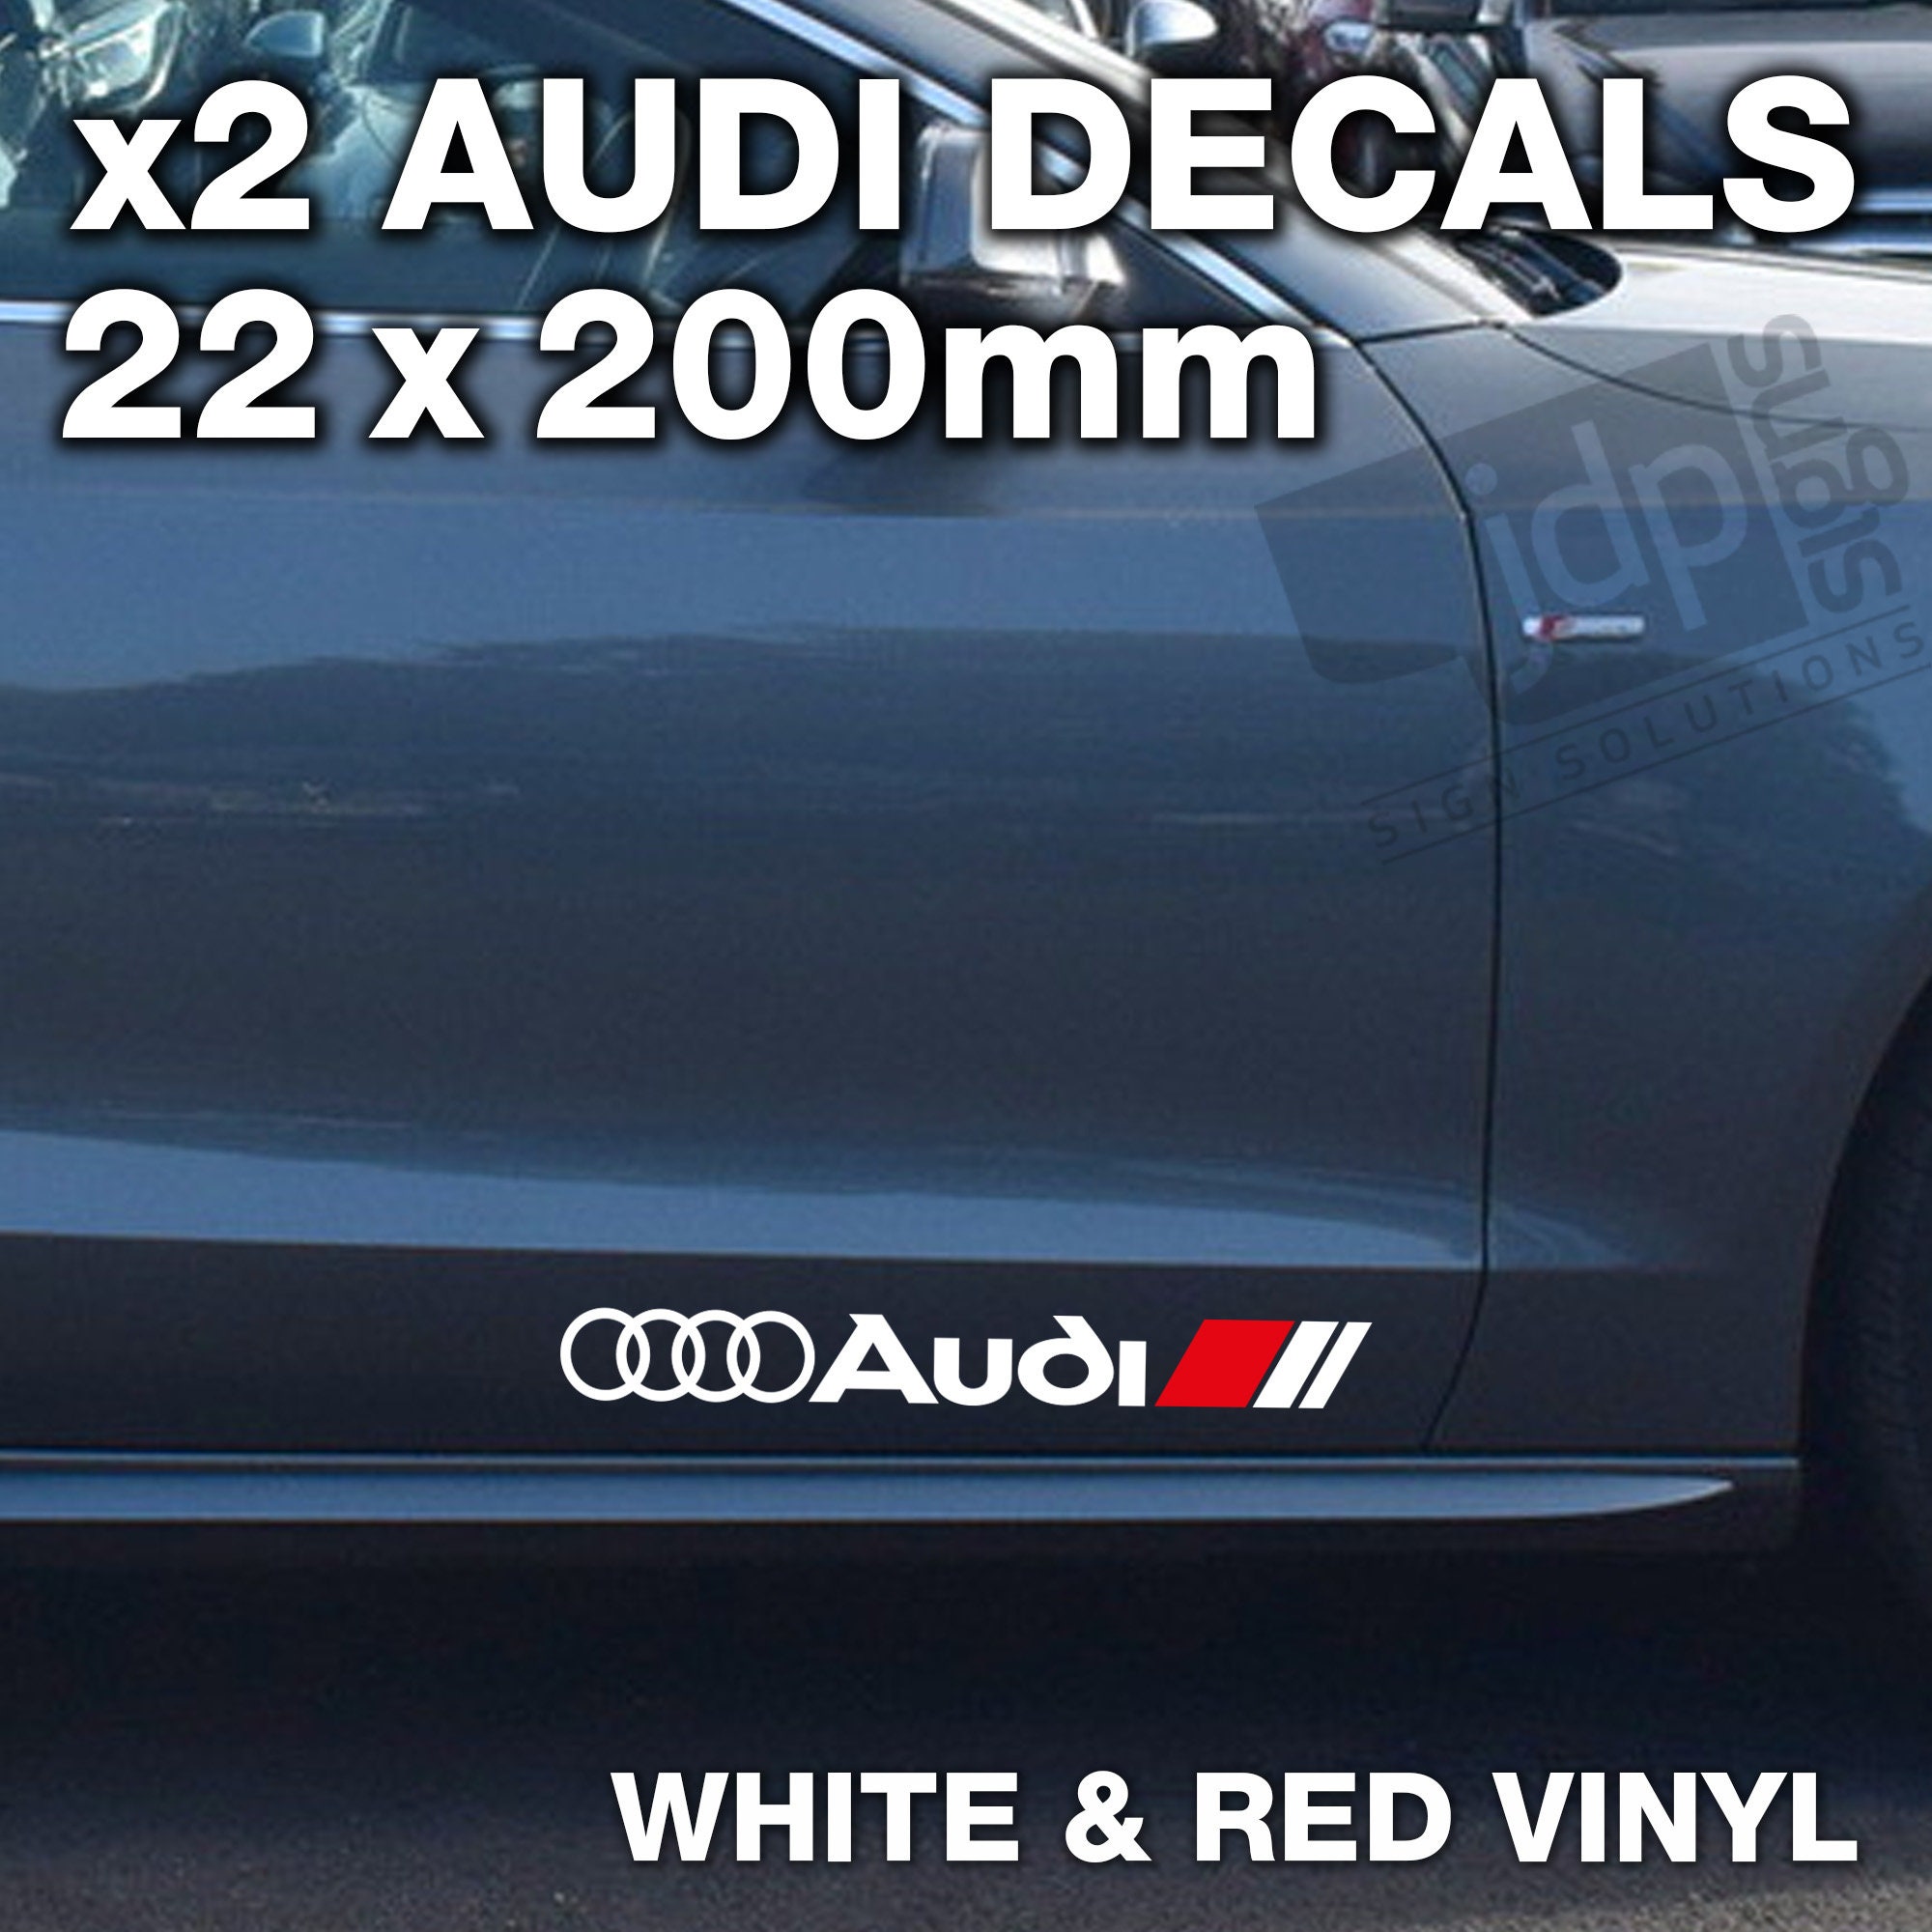 AUDI 2 x Door Side Skirt Decals Vinyl Stickers White & Red 22x200mm For All Models